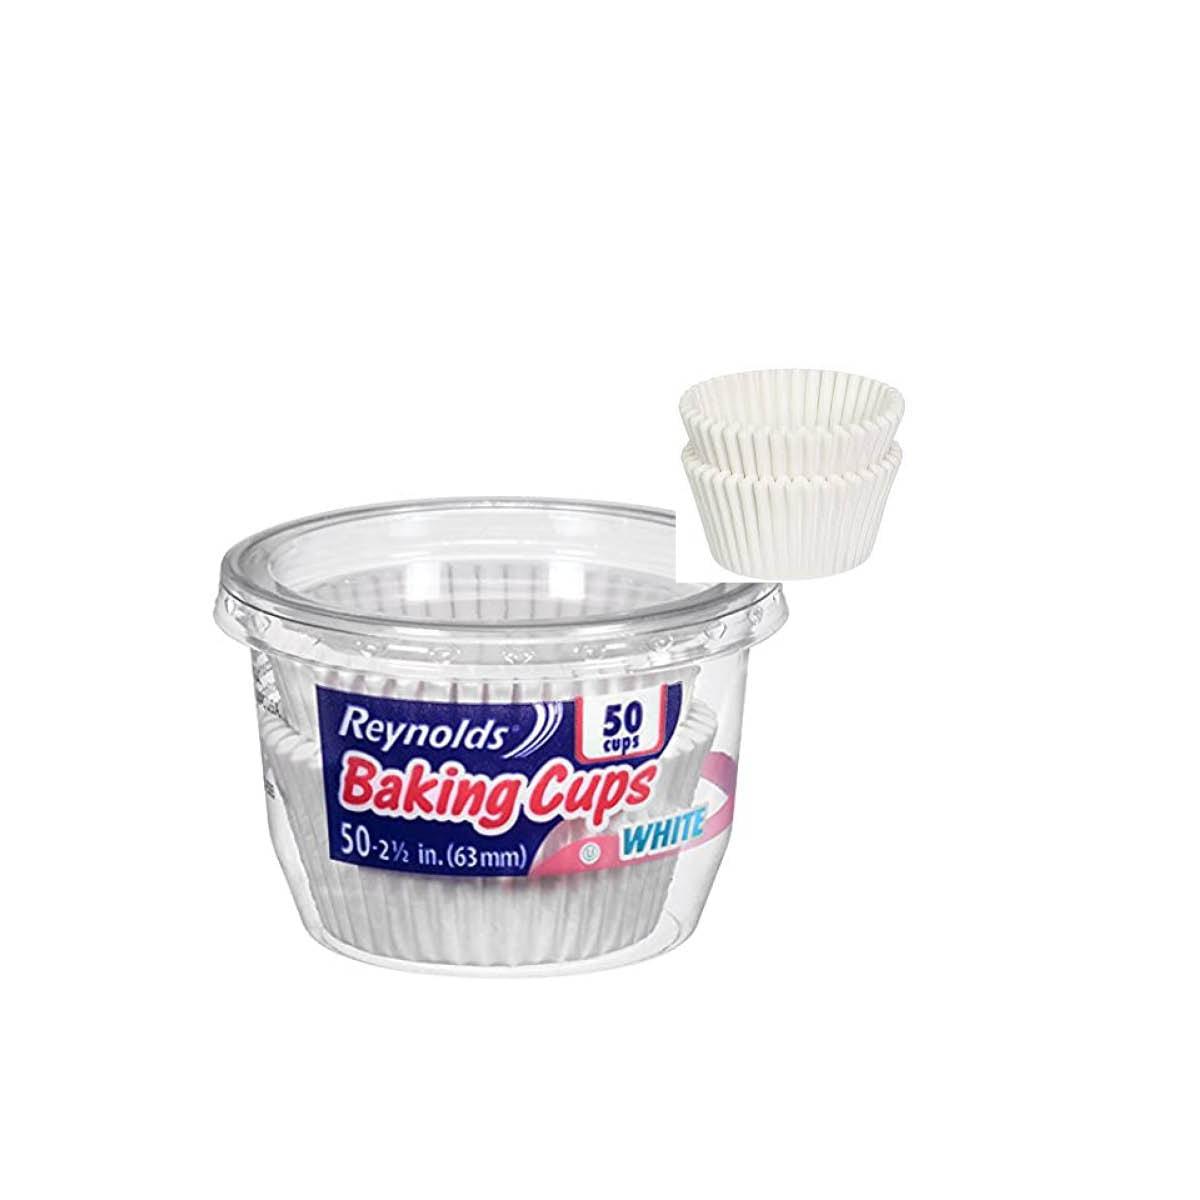 Reynolds Baking Cups Large White, 50 pack